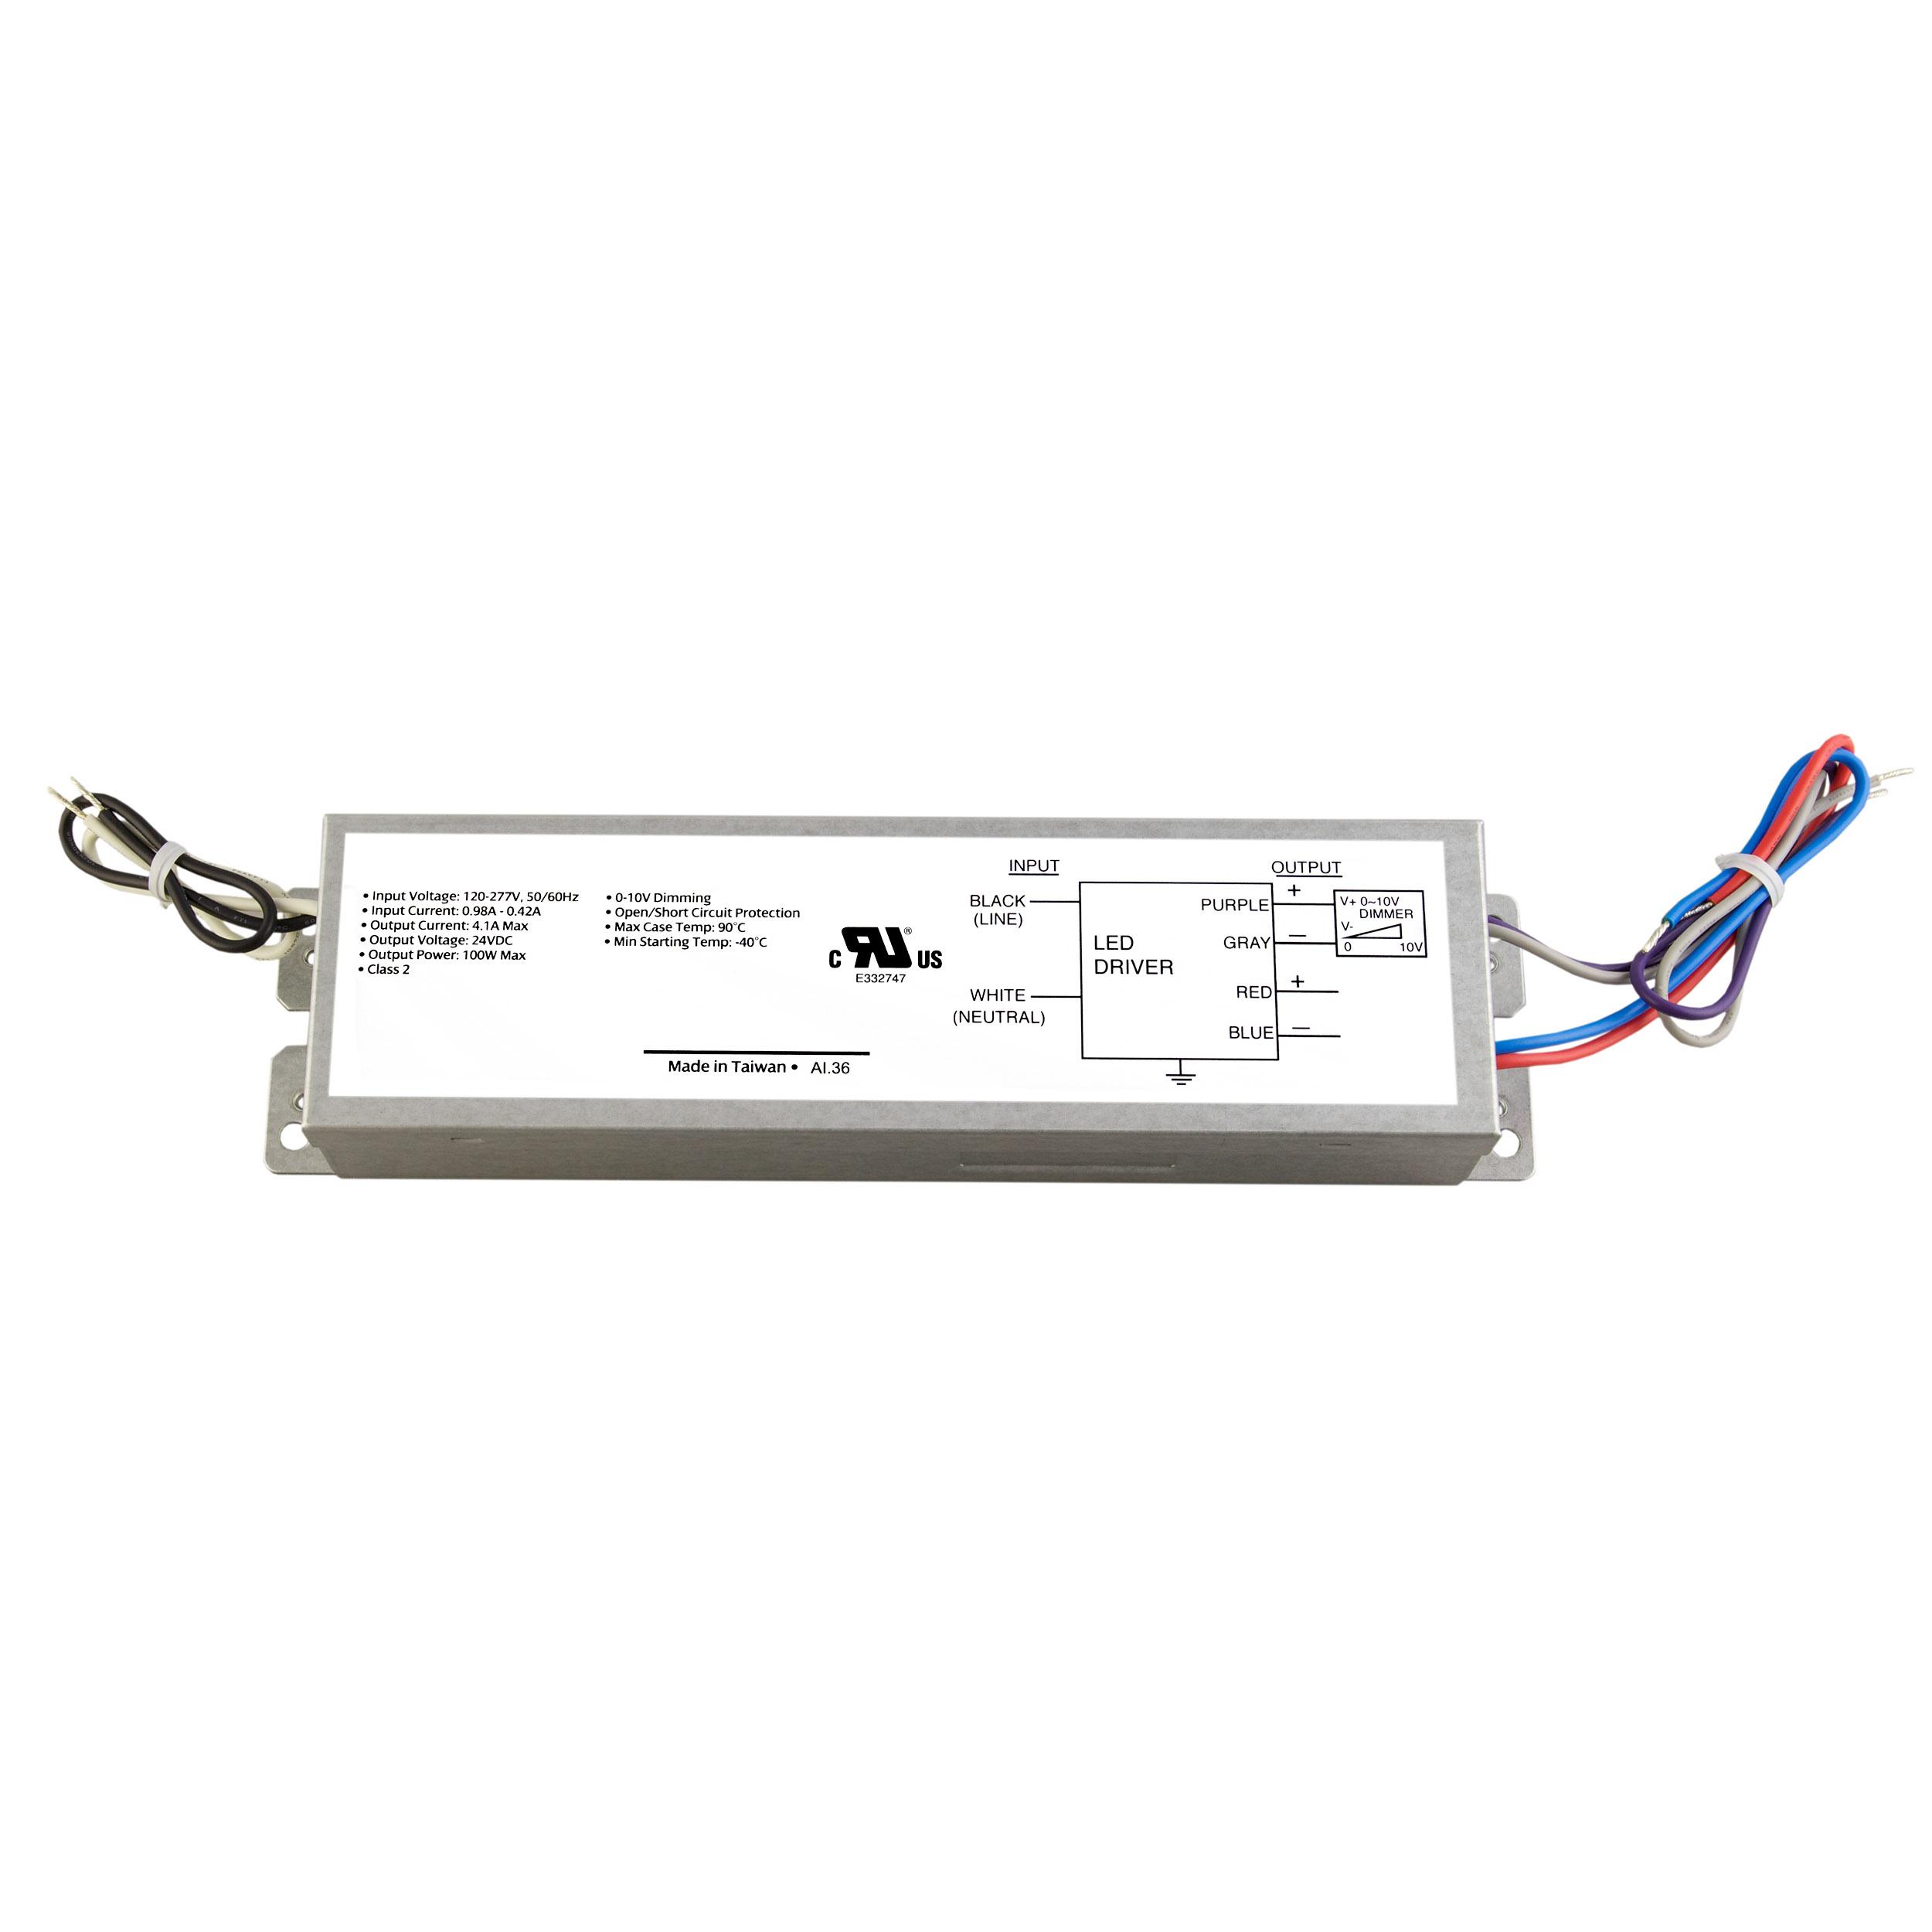 LED Retrofit Power Supplies - 0-10V Dimmable LED Drivers | Diode LED